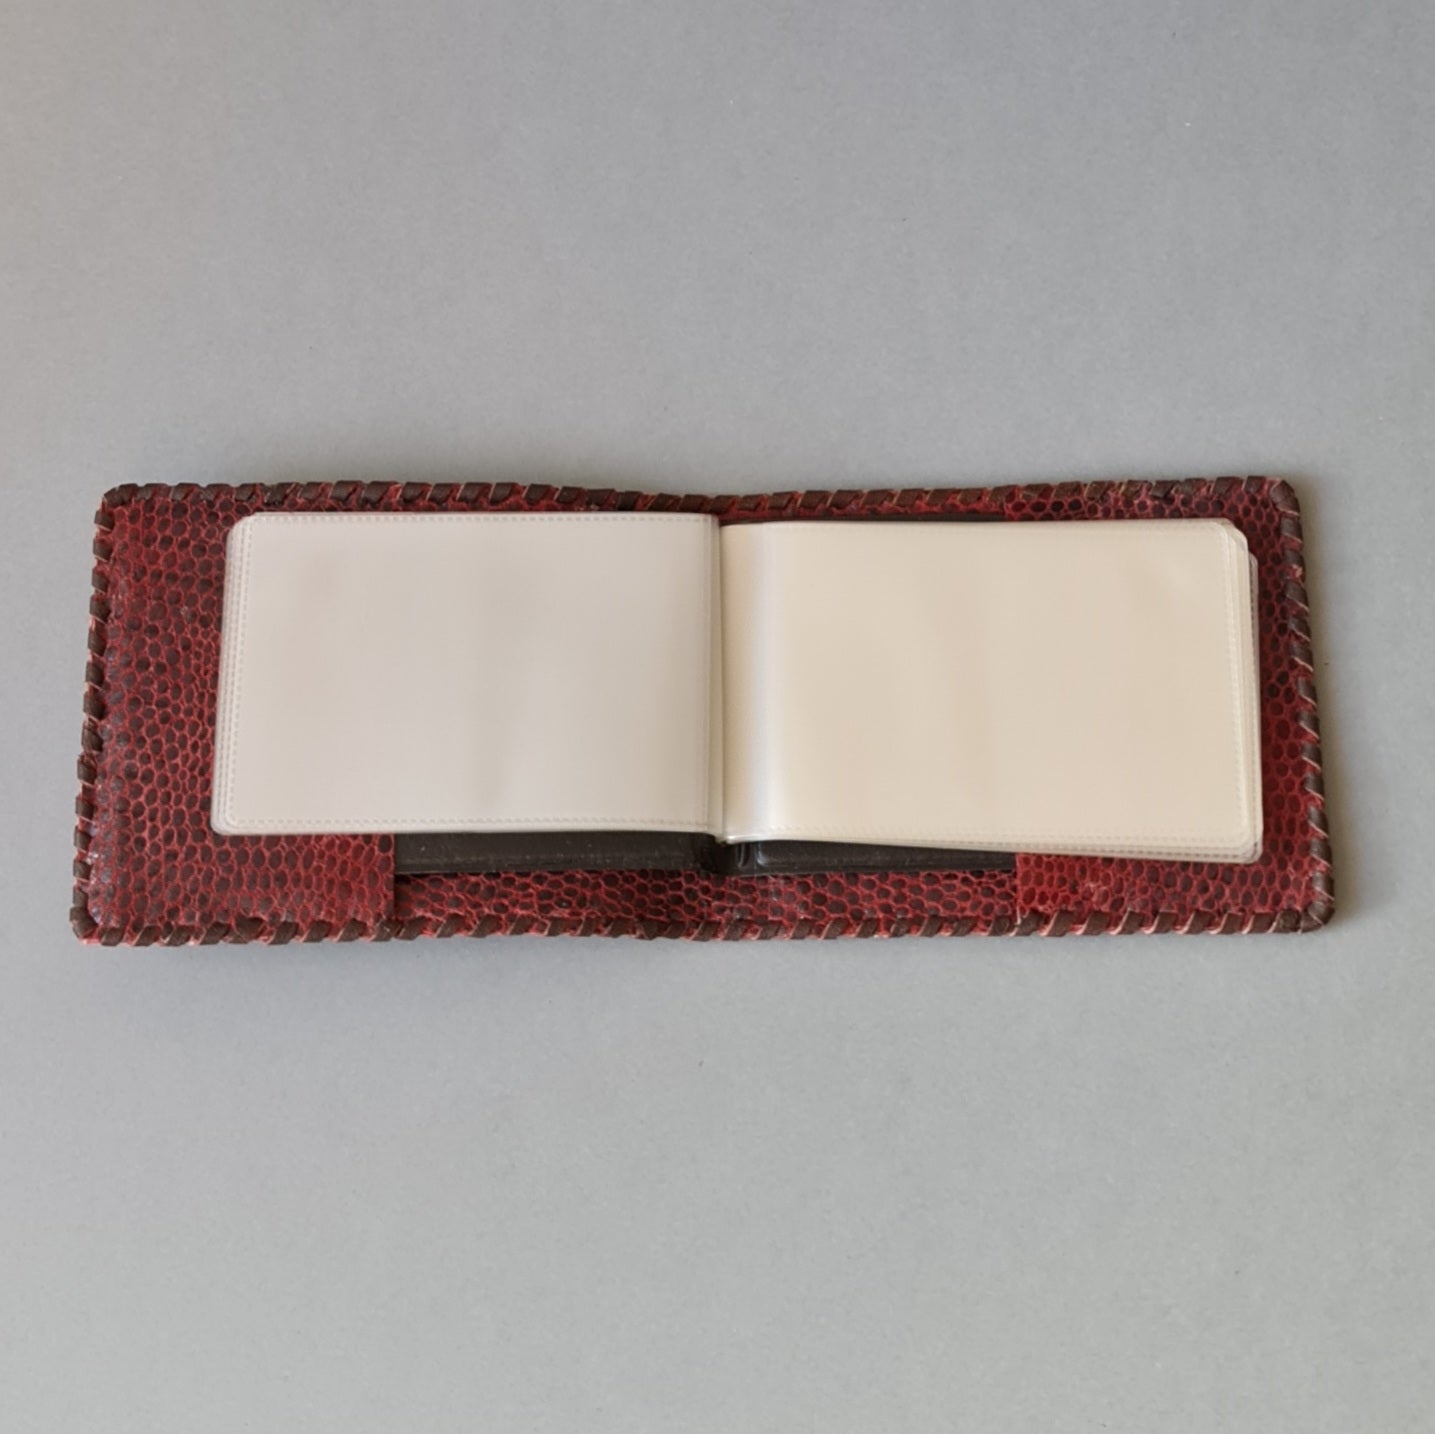 Business card pad for 40 standard size (9 x 5 cm) business cards. Leather / in brown tones in a horizontal pattern with leather lining / 11 x 8.5 cm (MAPL)